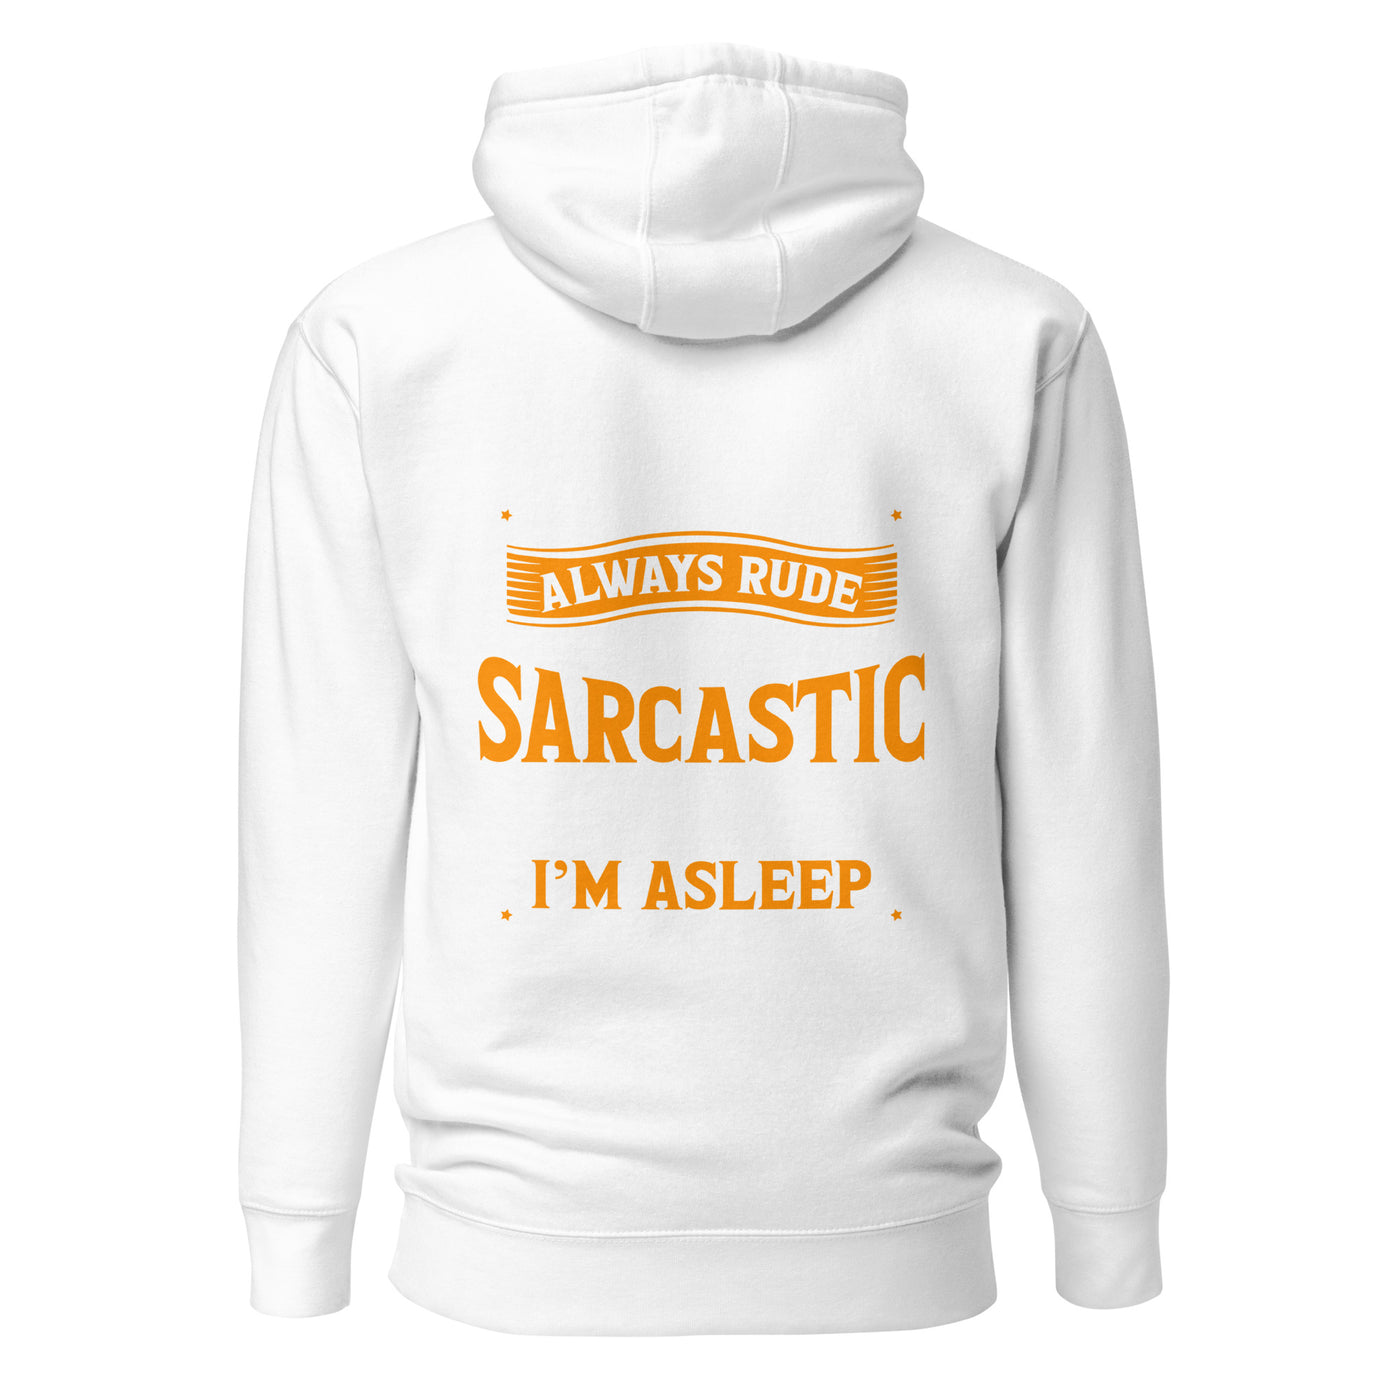 I am not always rude and sarcastic: Sometimes, I am asleep - Unisex Hoodie ( Back Print )